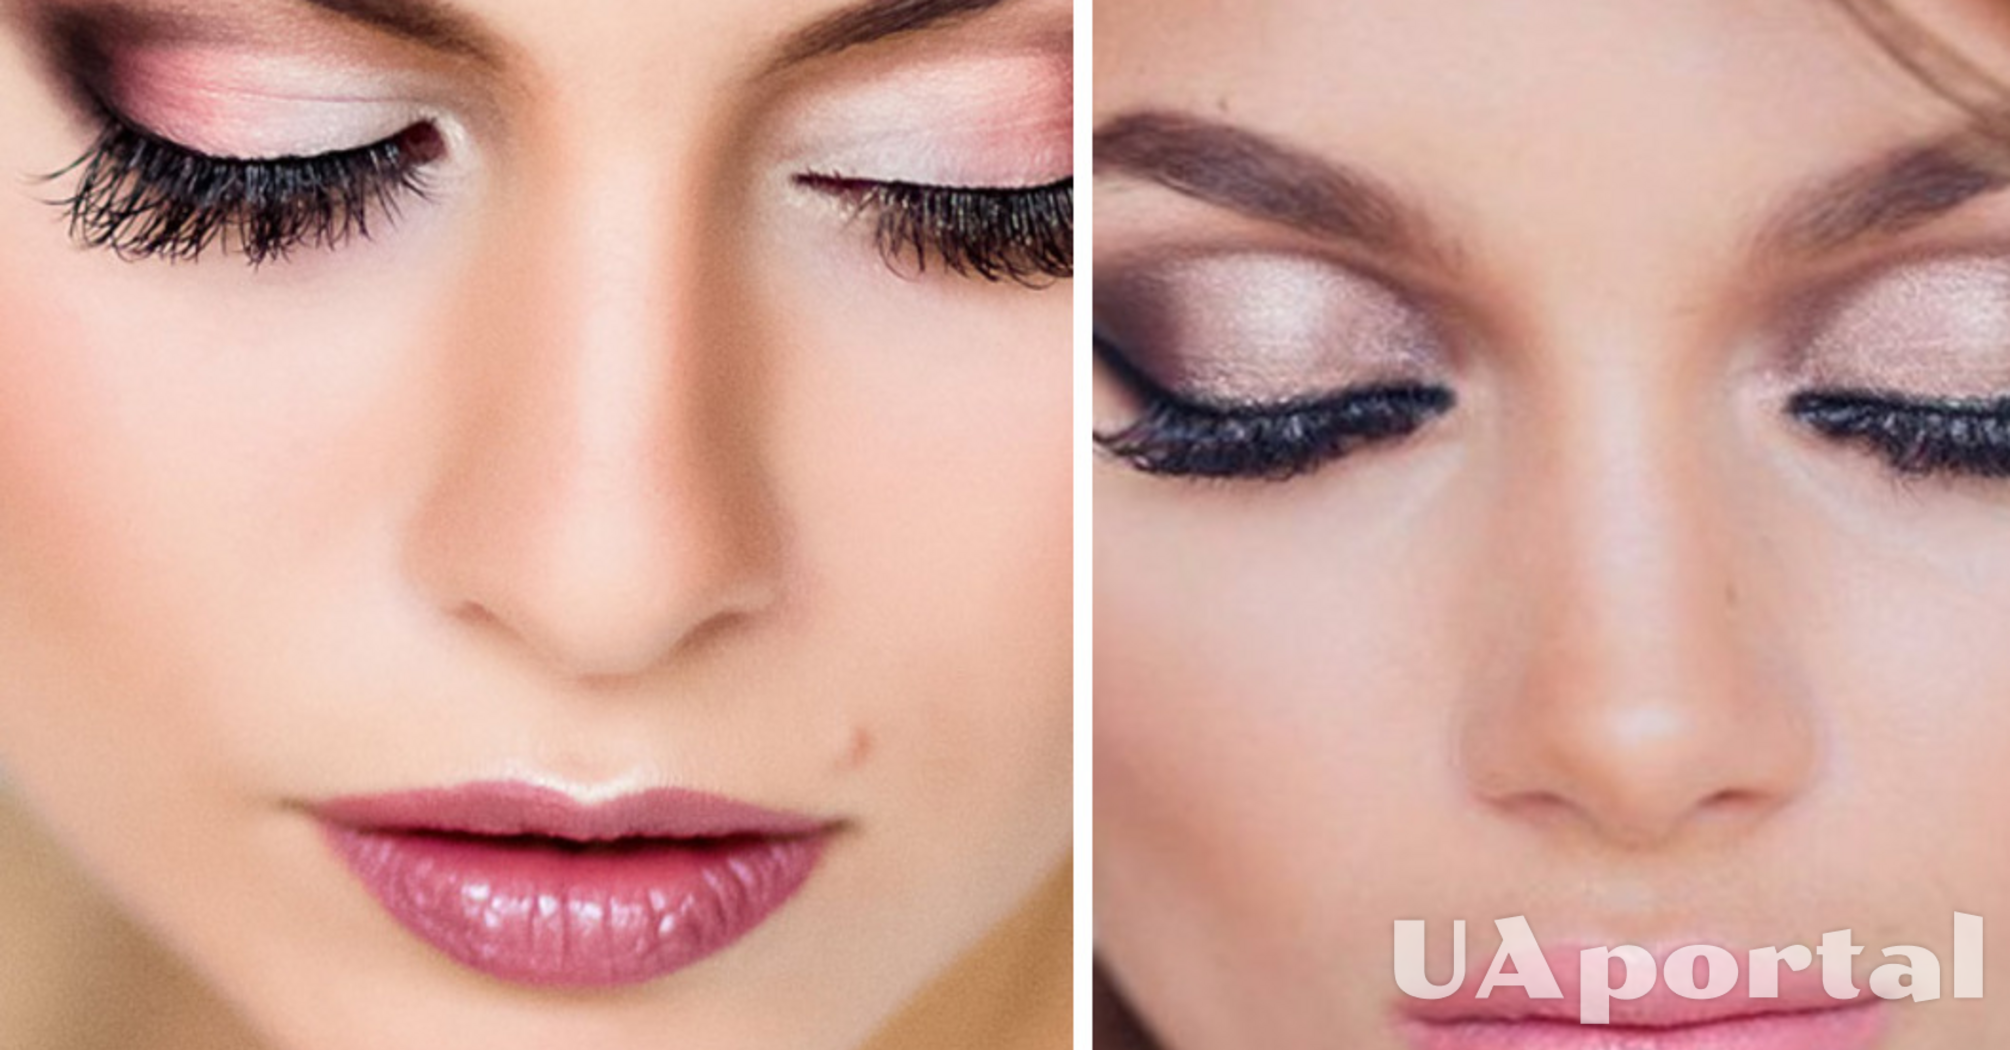 If you have 5 minutes to go: how to quickly apply makeup